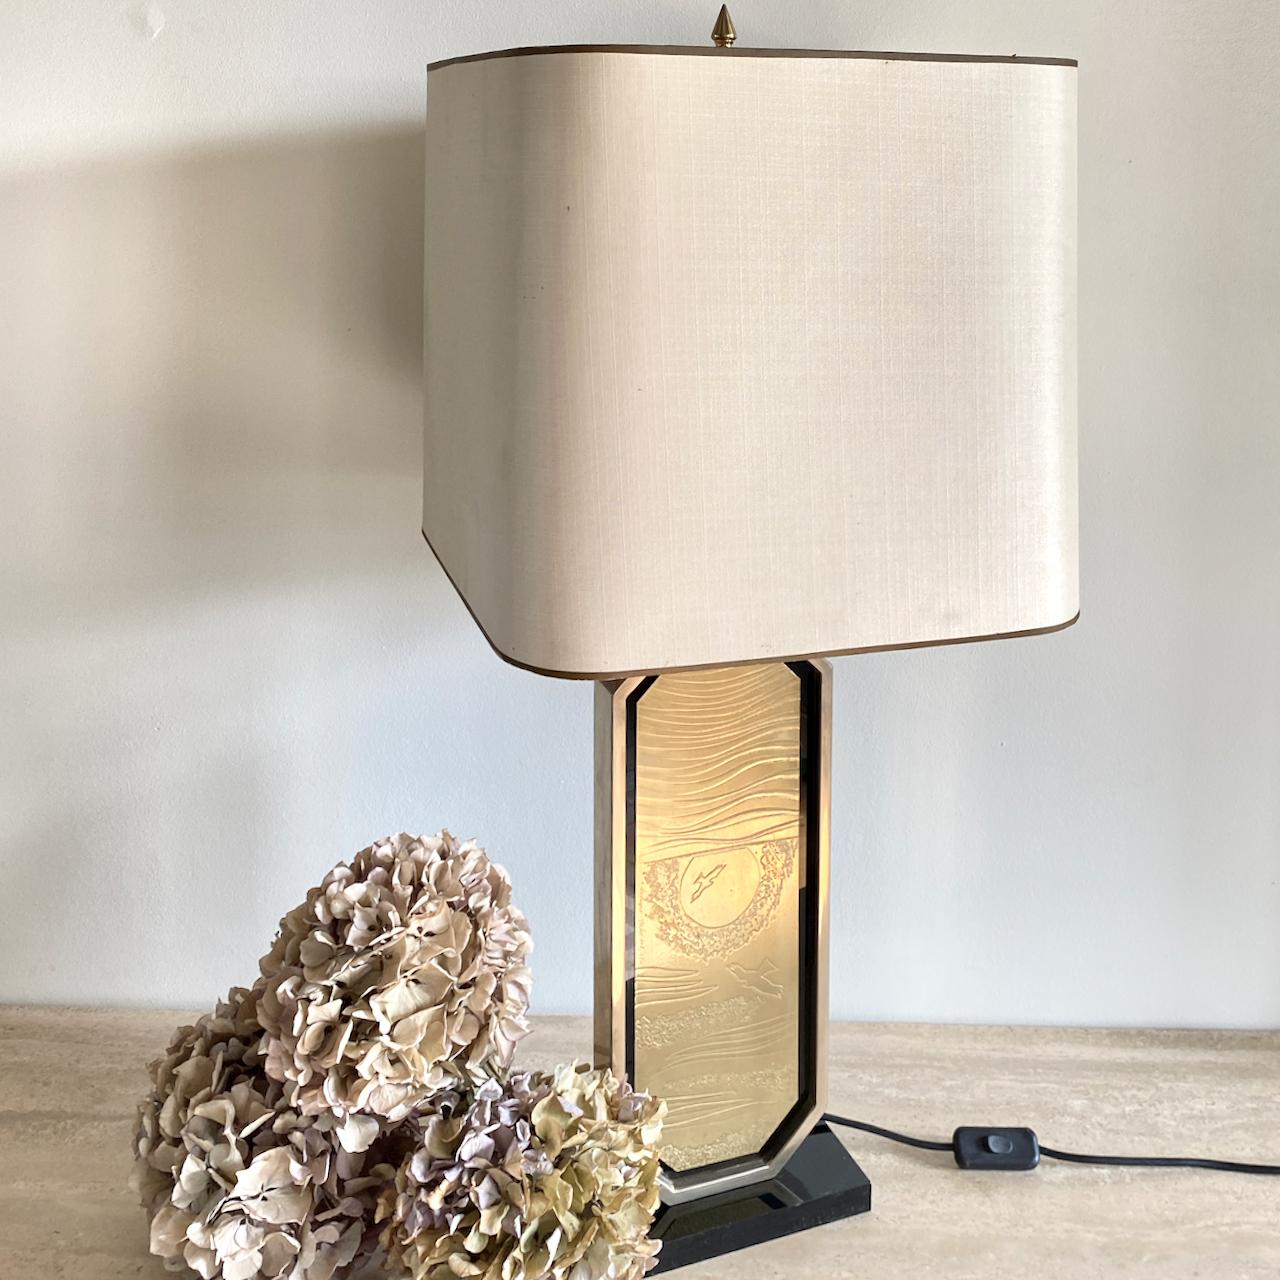 George Mathias 23kt gold plated table lamp 1970's For Sale 1